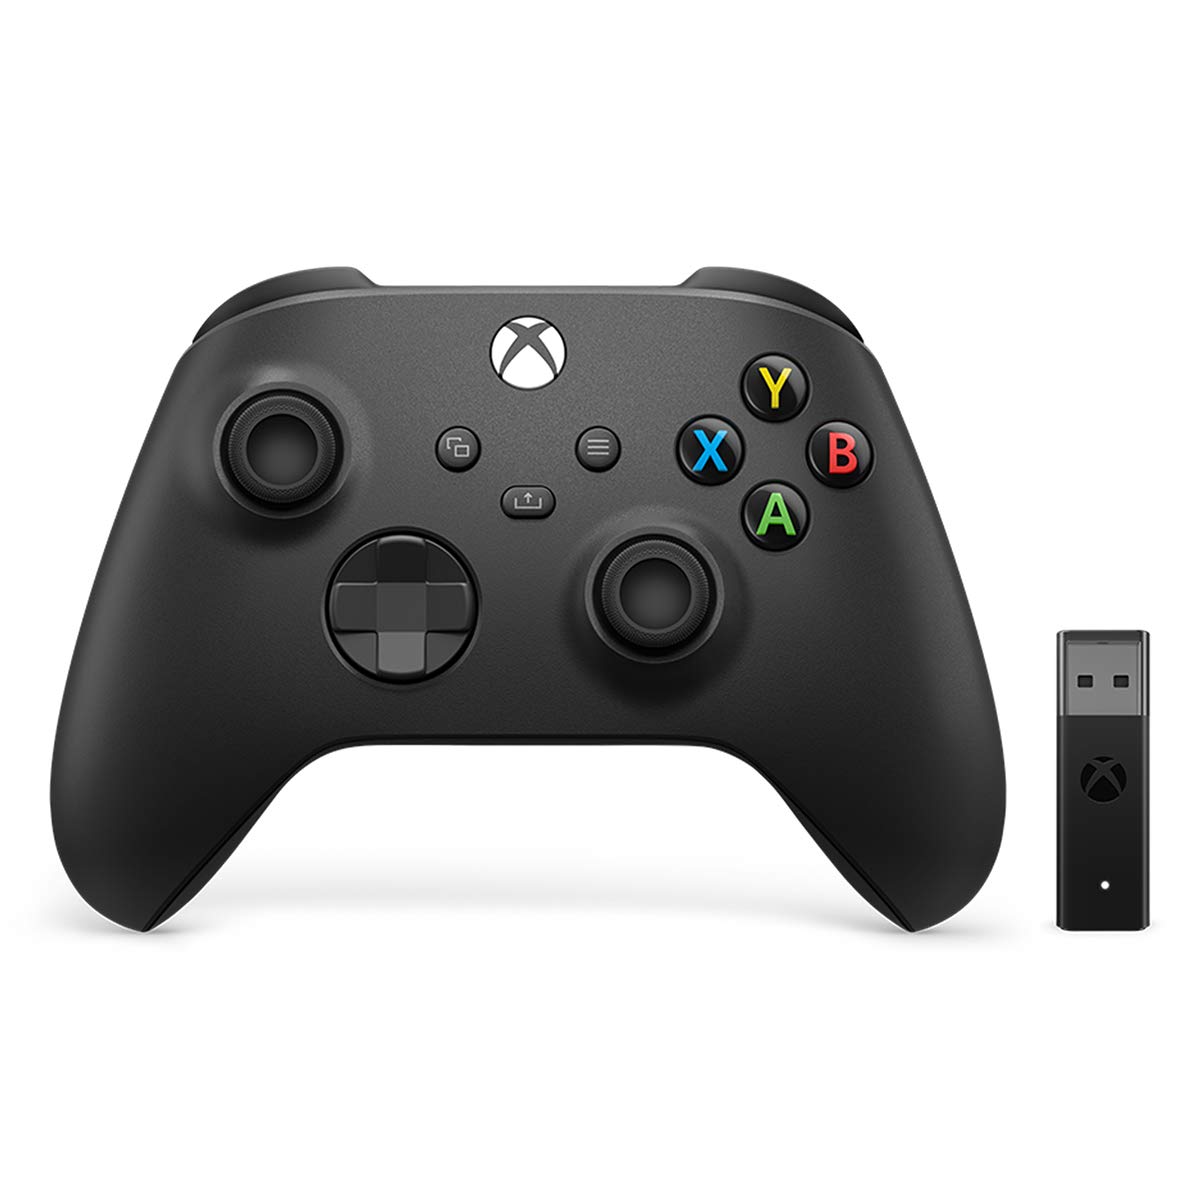 Microsoft Xbox Wireless Controller + Wireless Adapter for Windows 10 $45 + Free Shipping